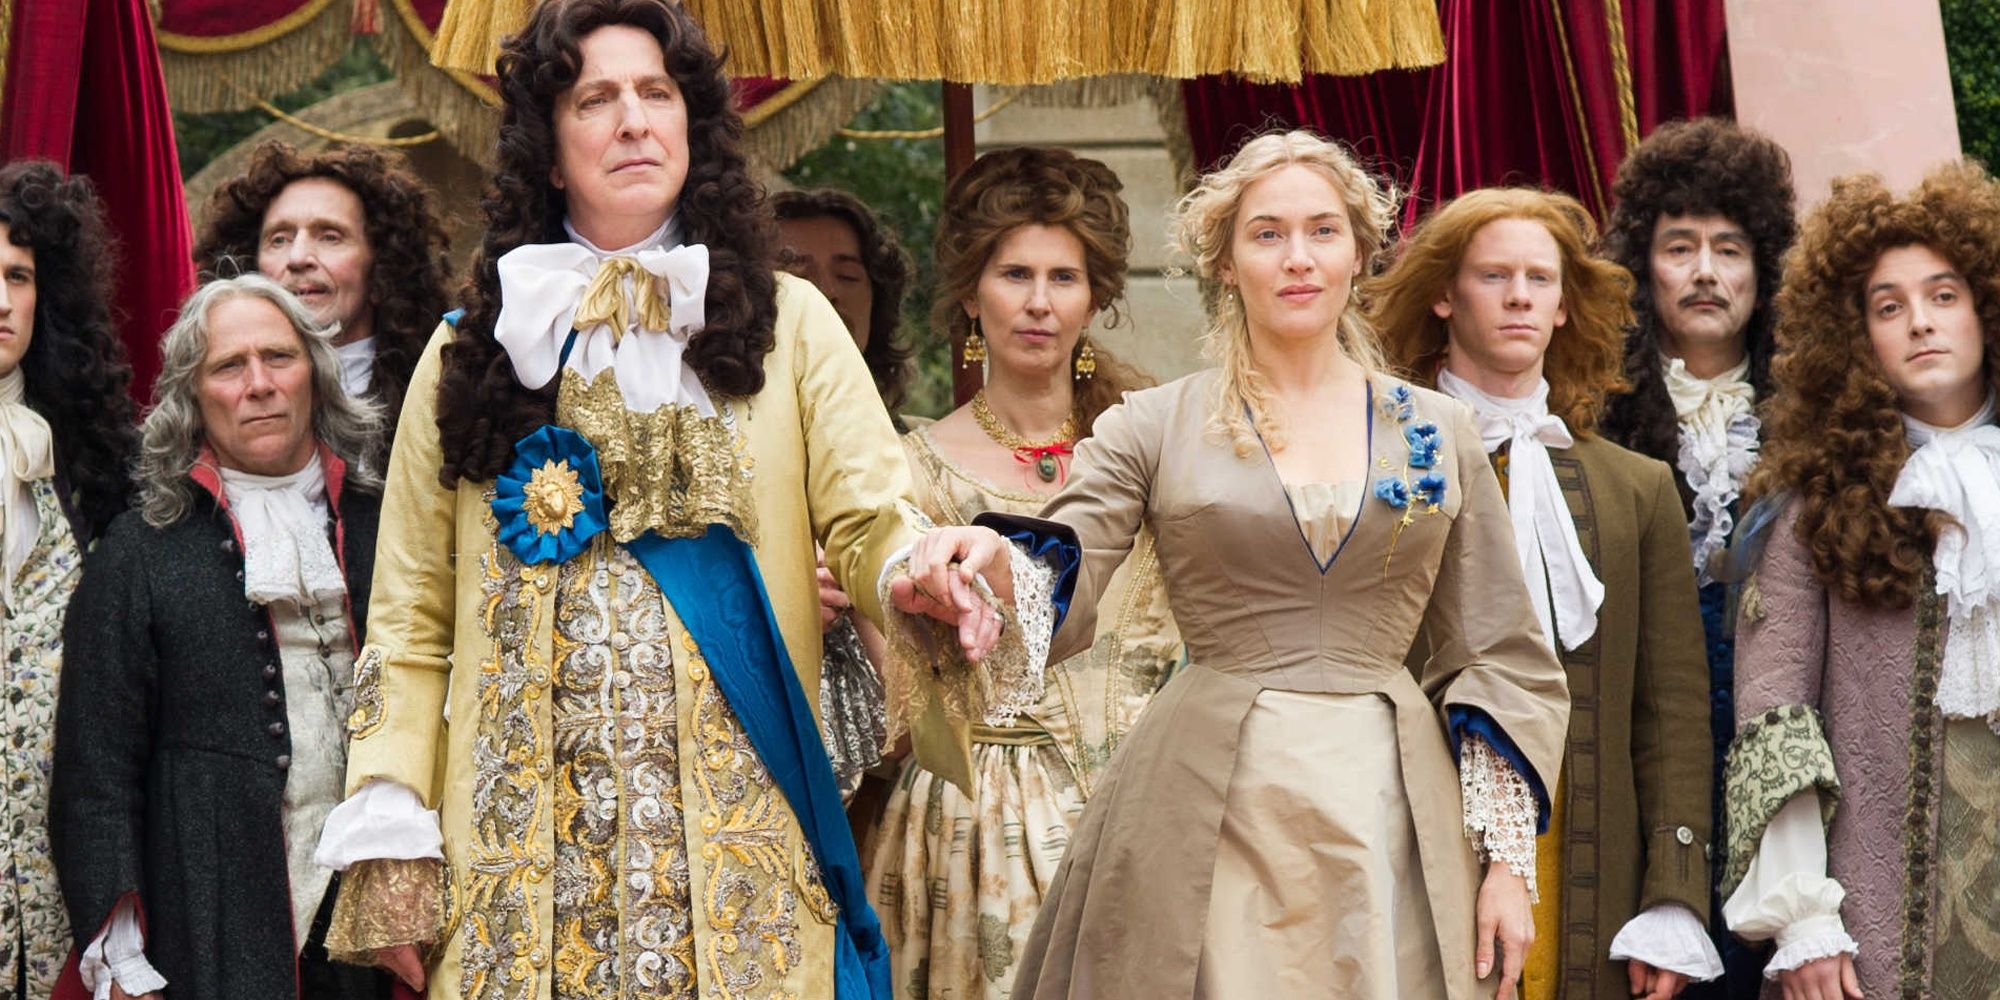 Alan Rickman and Kate Winslet holding hands in A Little Chaos 